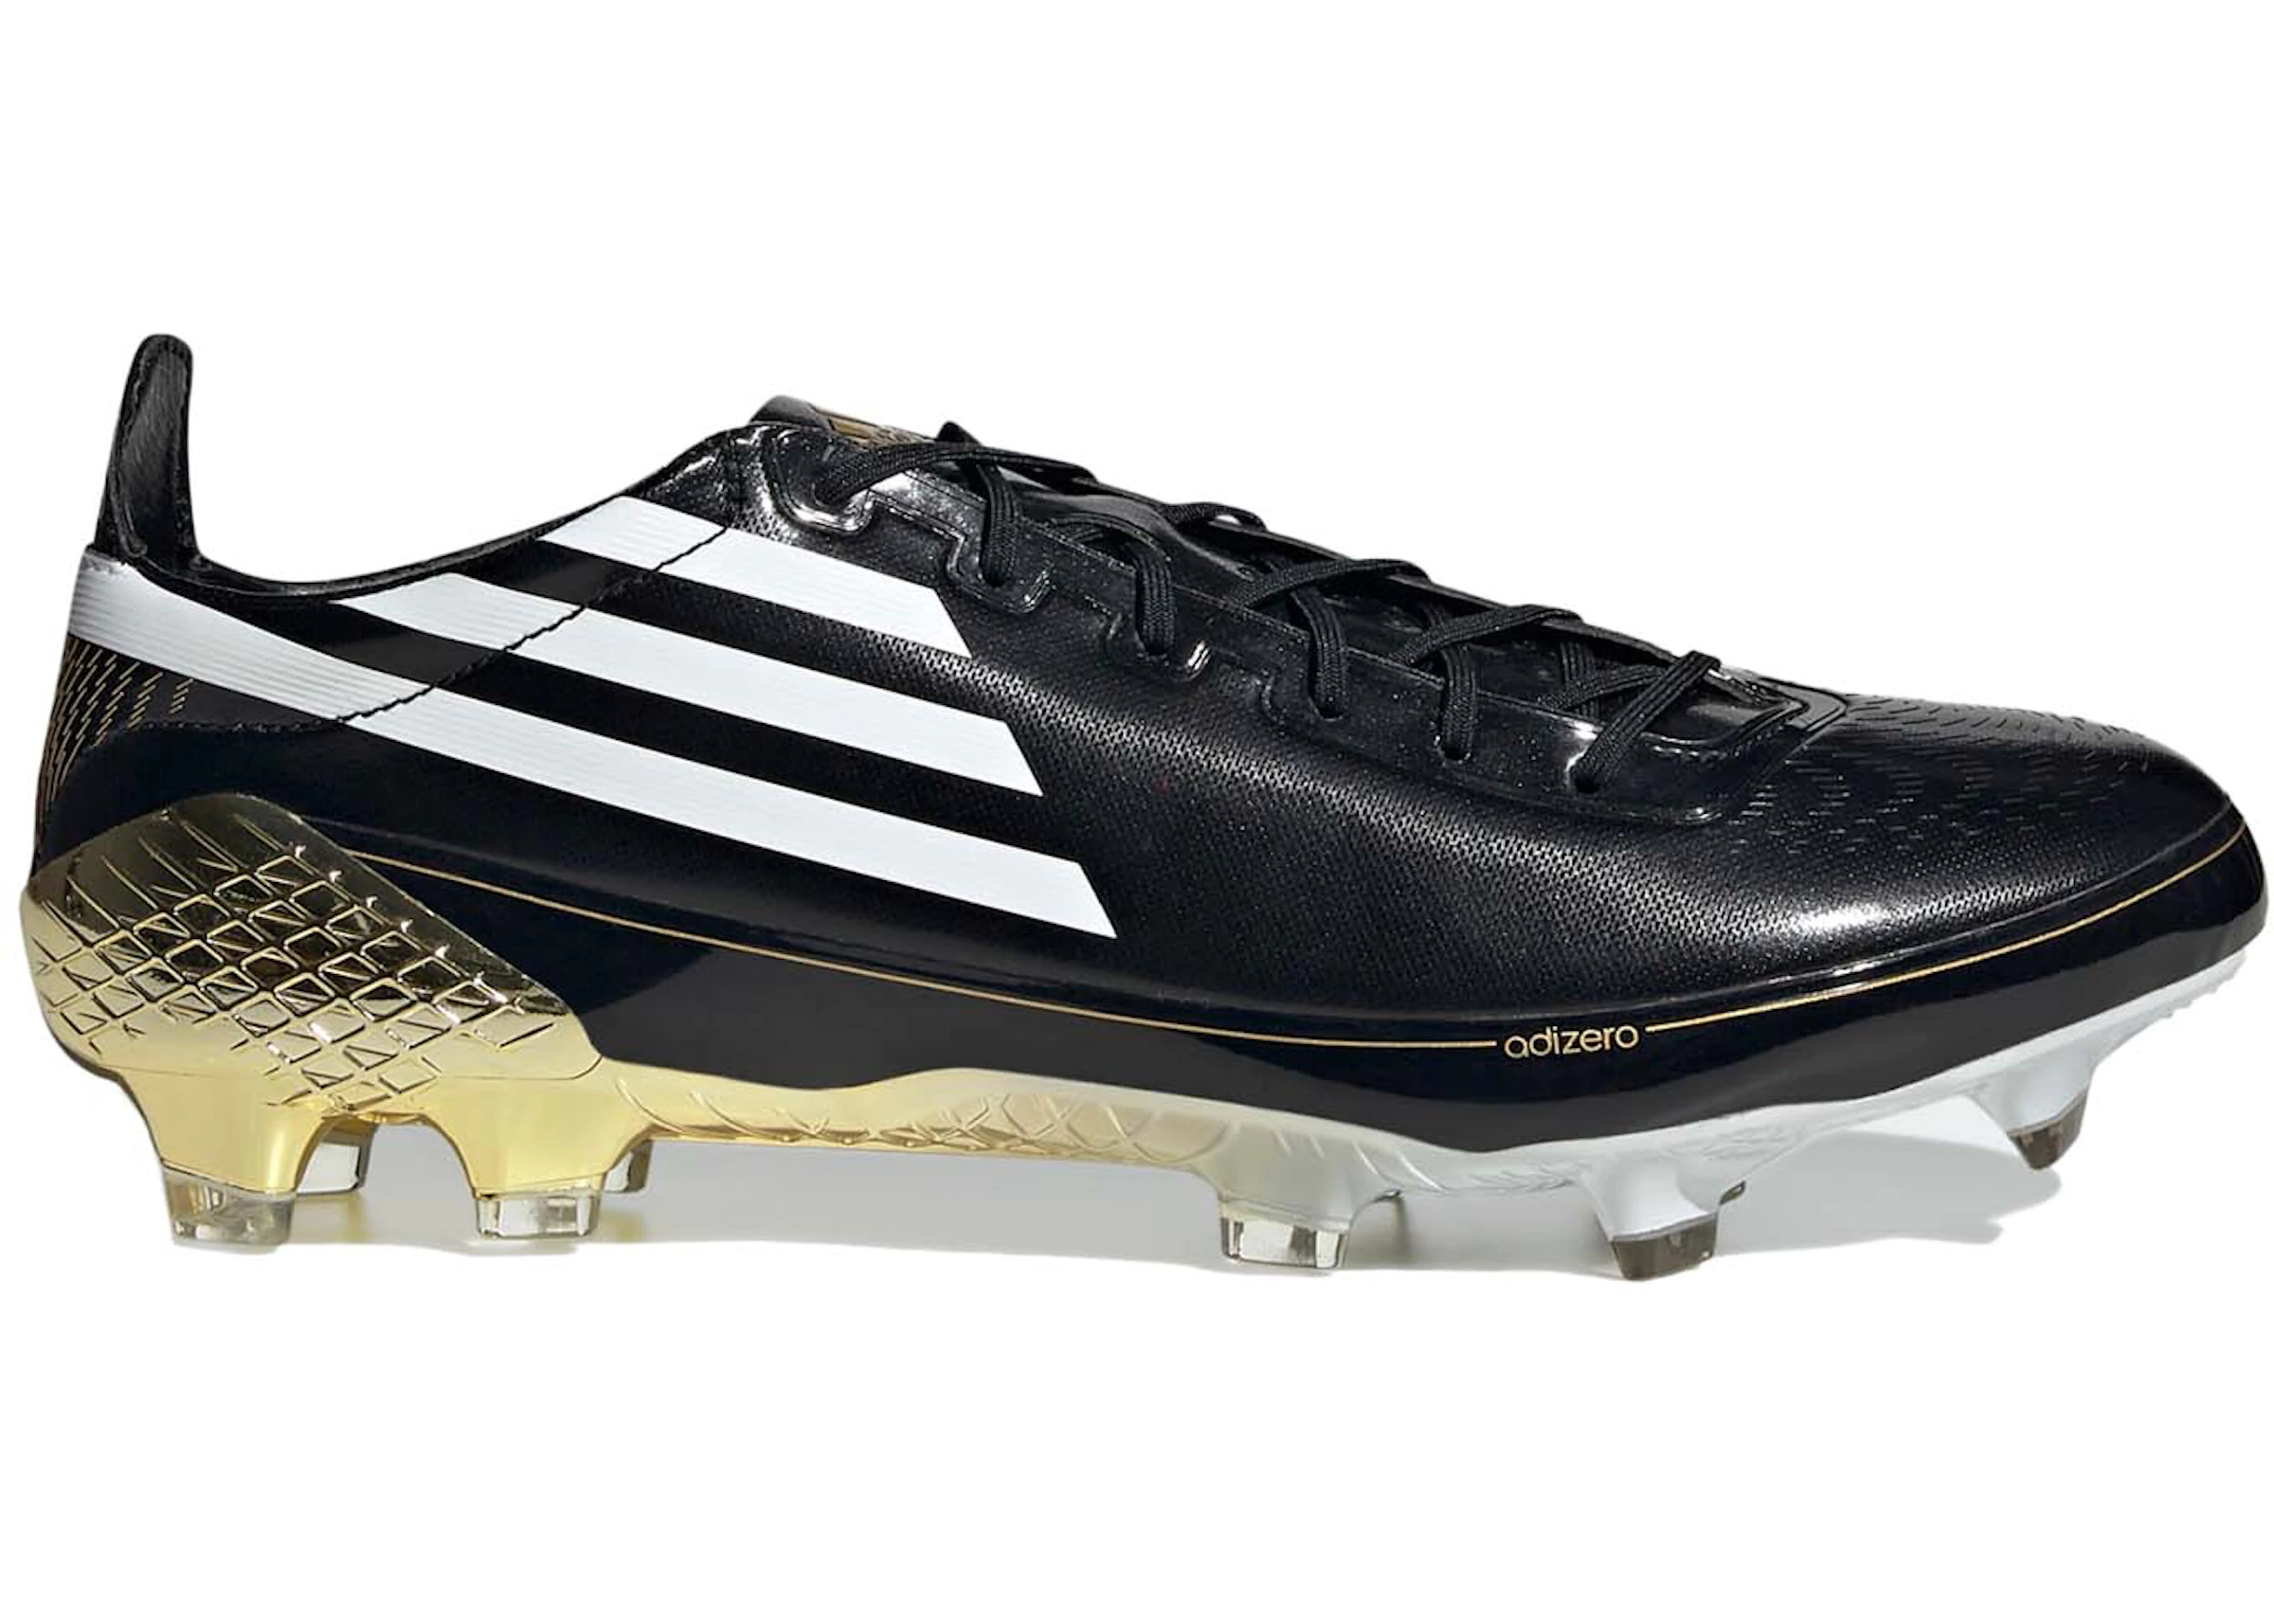 inflation Staple drifting adidas F50 Ghosted Adizero FG Legends Pack - GX0220 - US